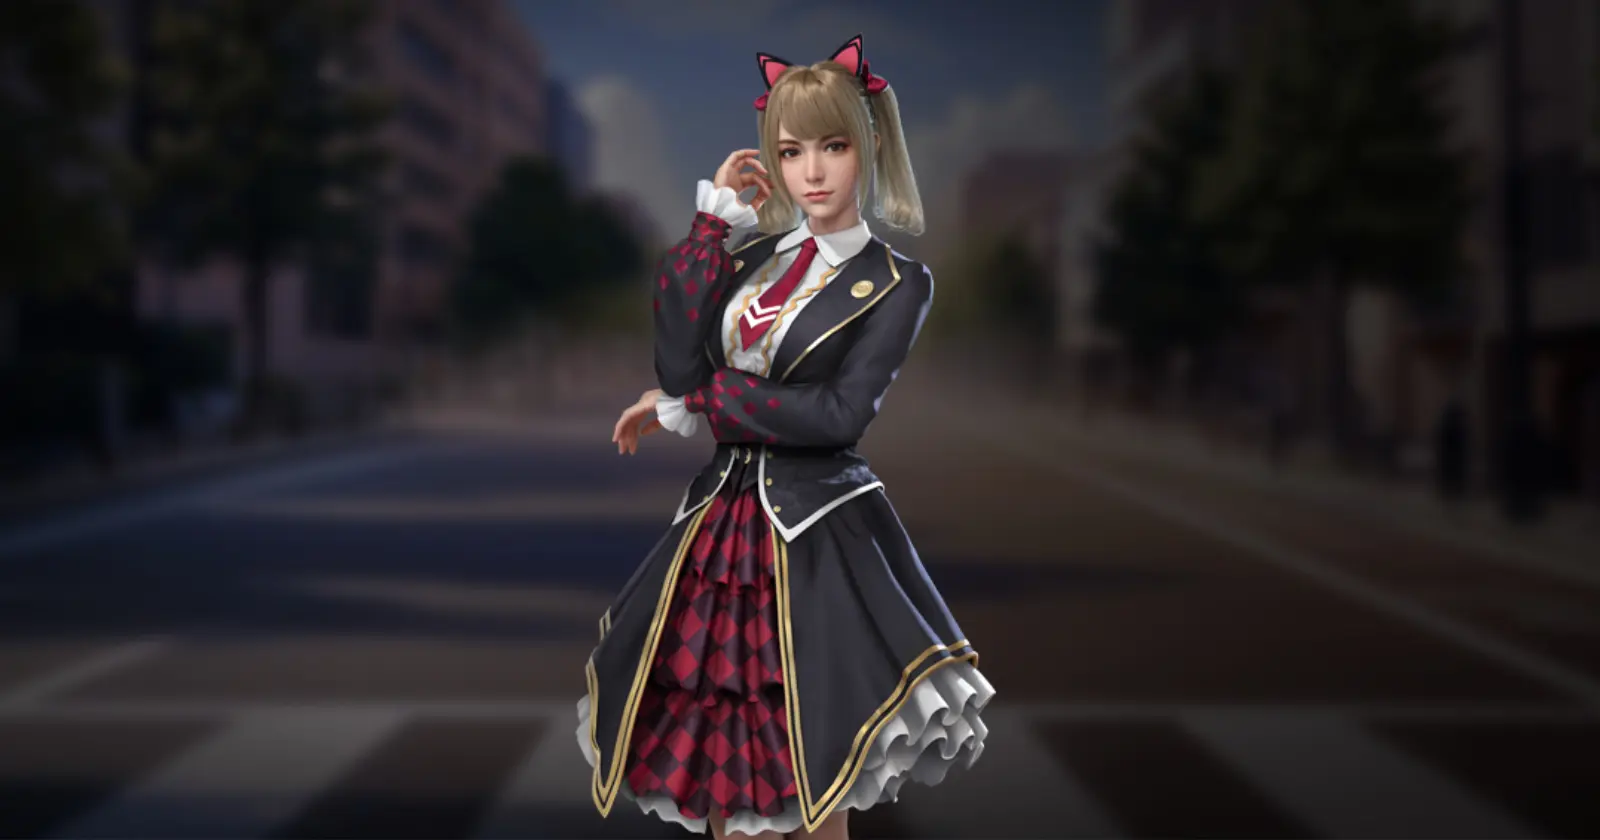 Caroline from Free Fire, in school uniform, stands on a deserted road: black blazer, white-trimmed, red tie, checkered skirt.